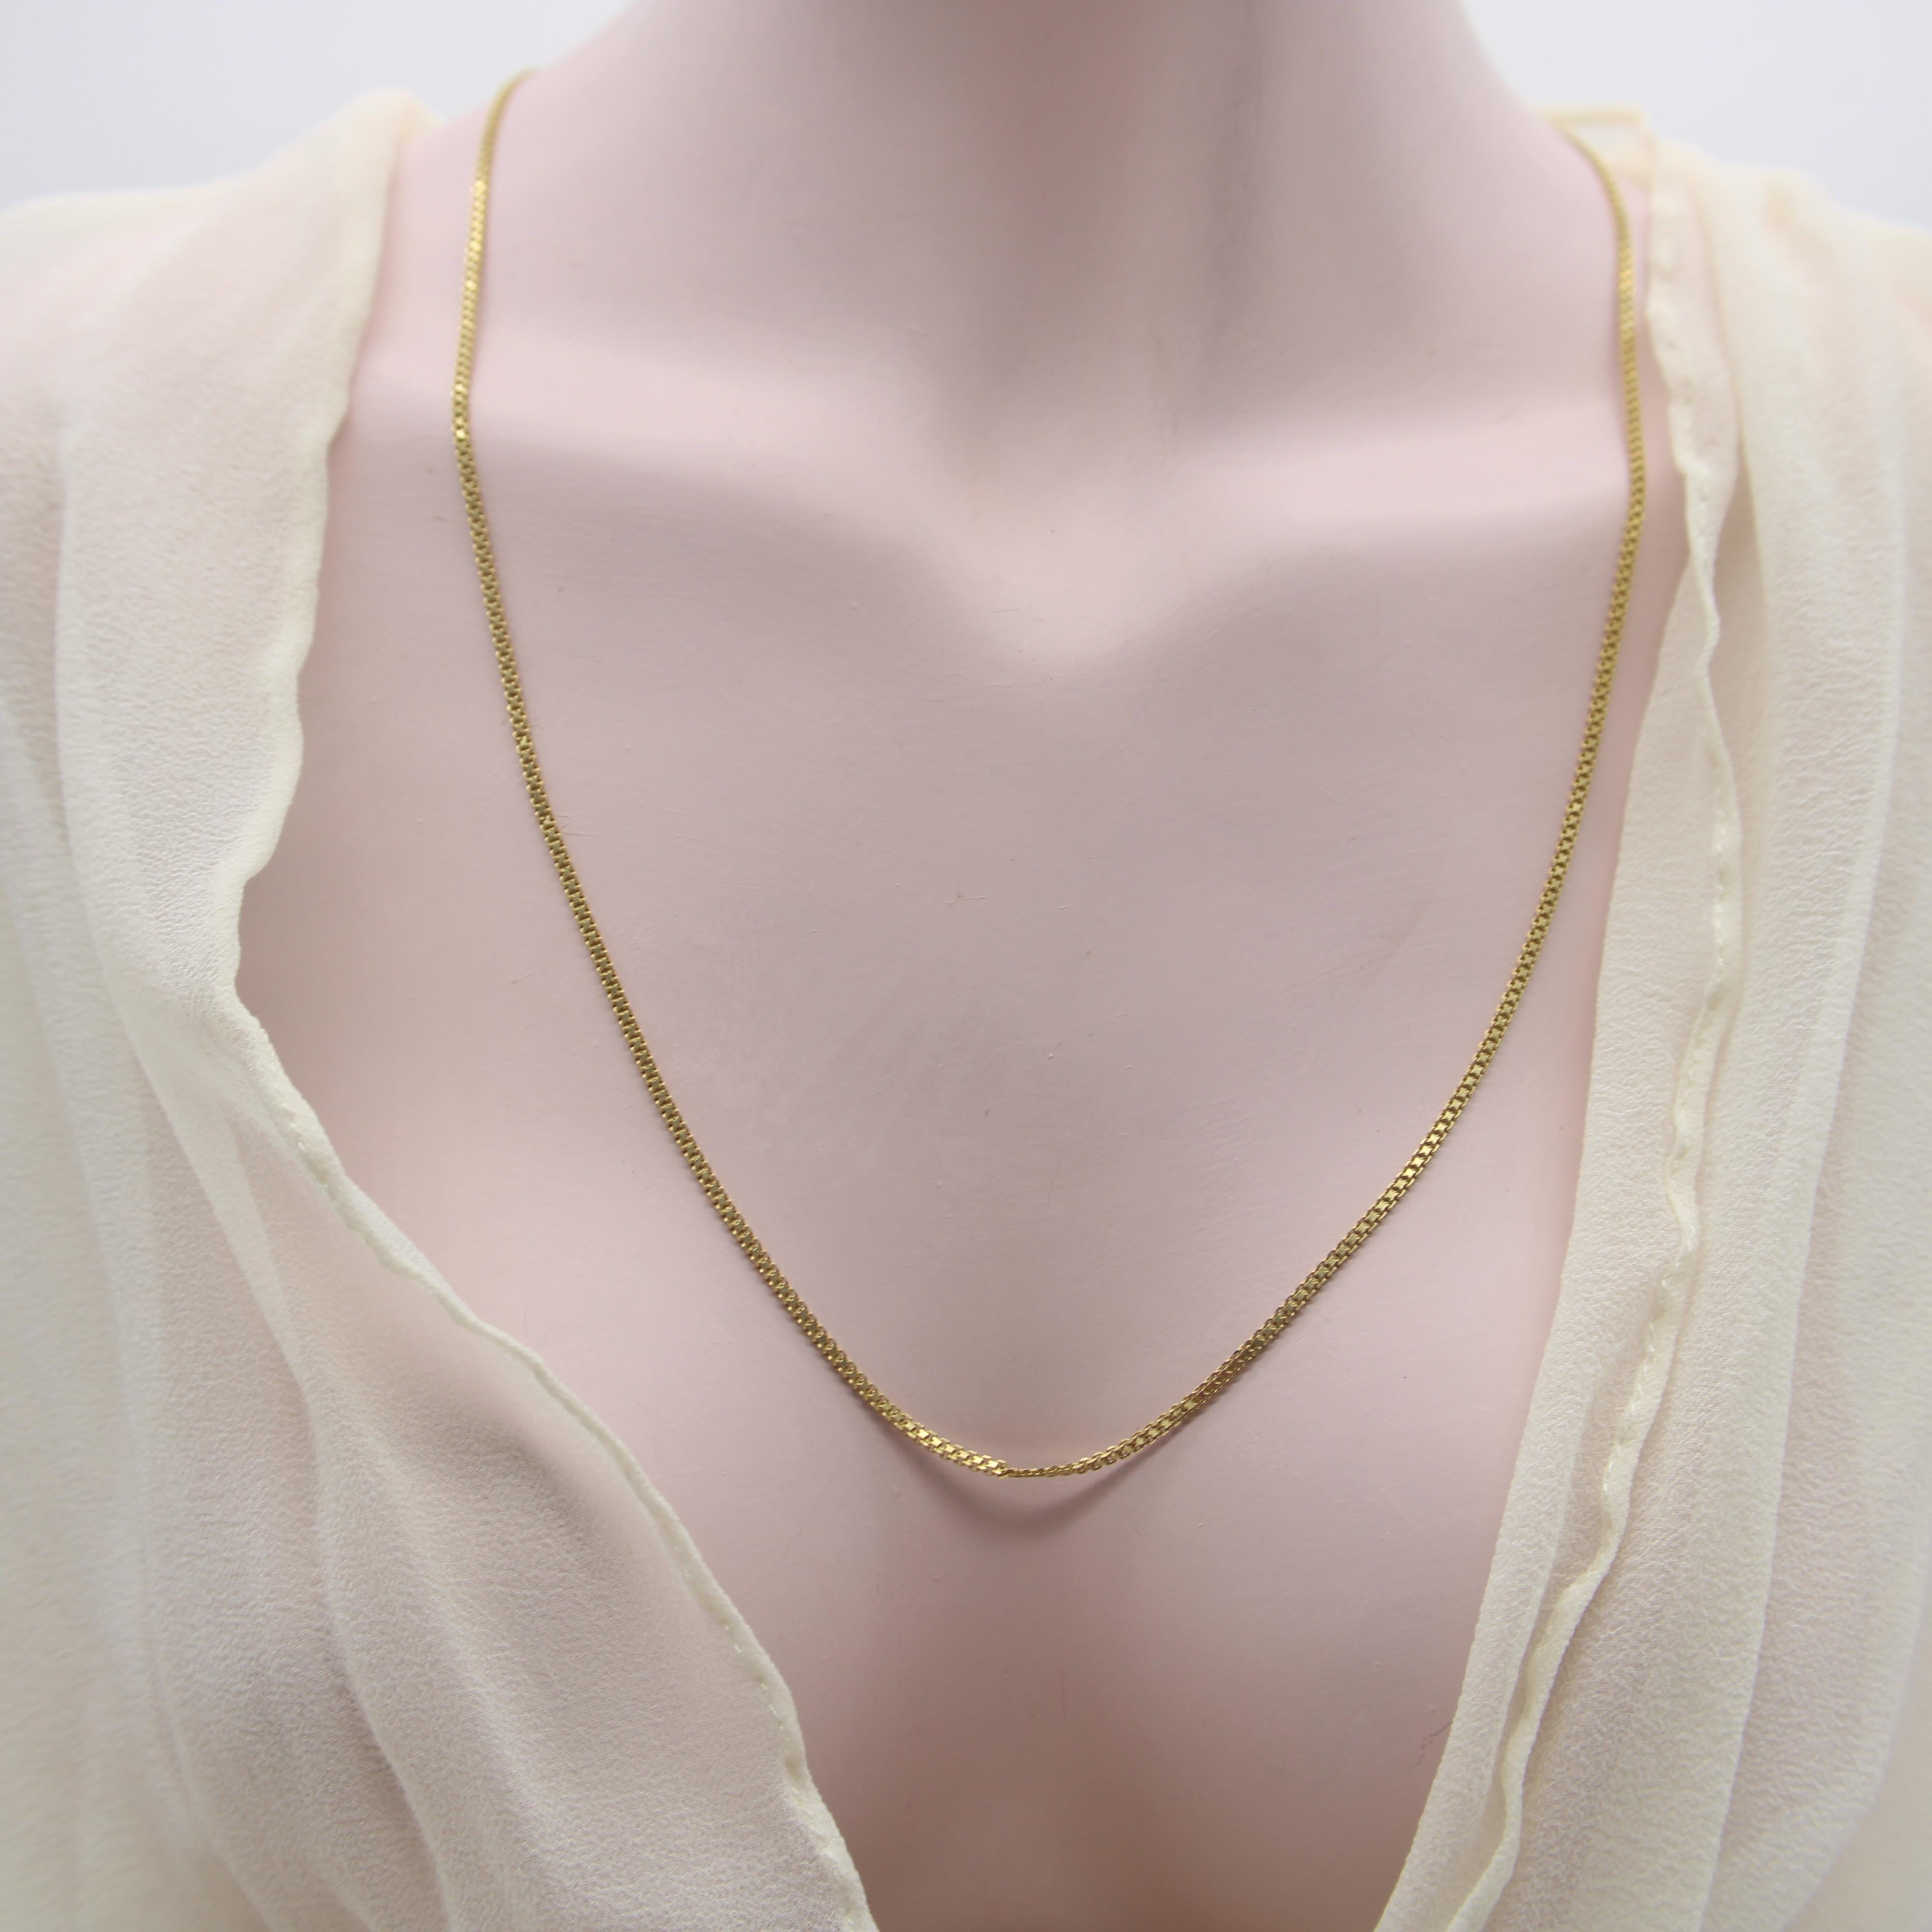 Vintage 22K Gold Flattened Double-Linked Long 28” Chain Necklace For Sale 1